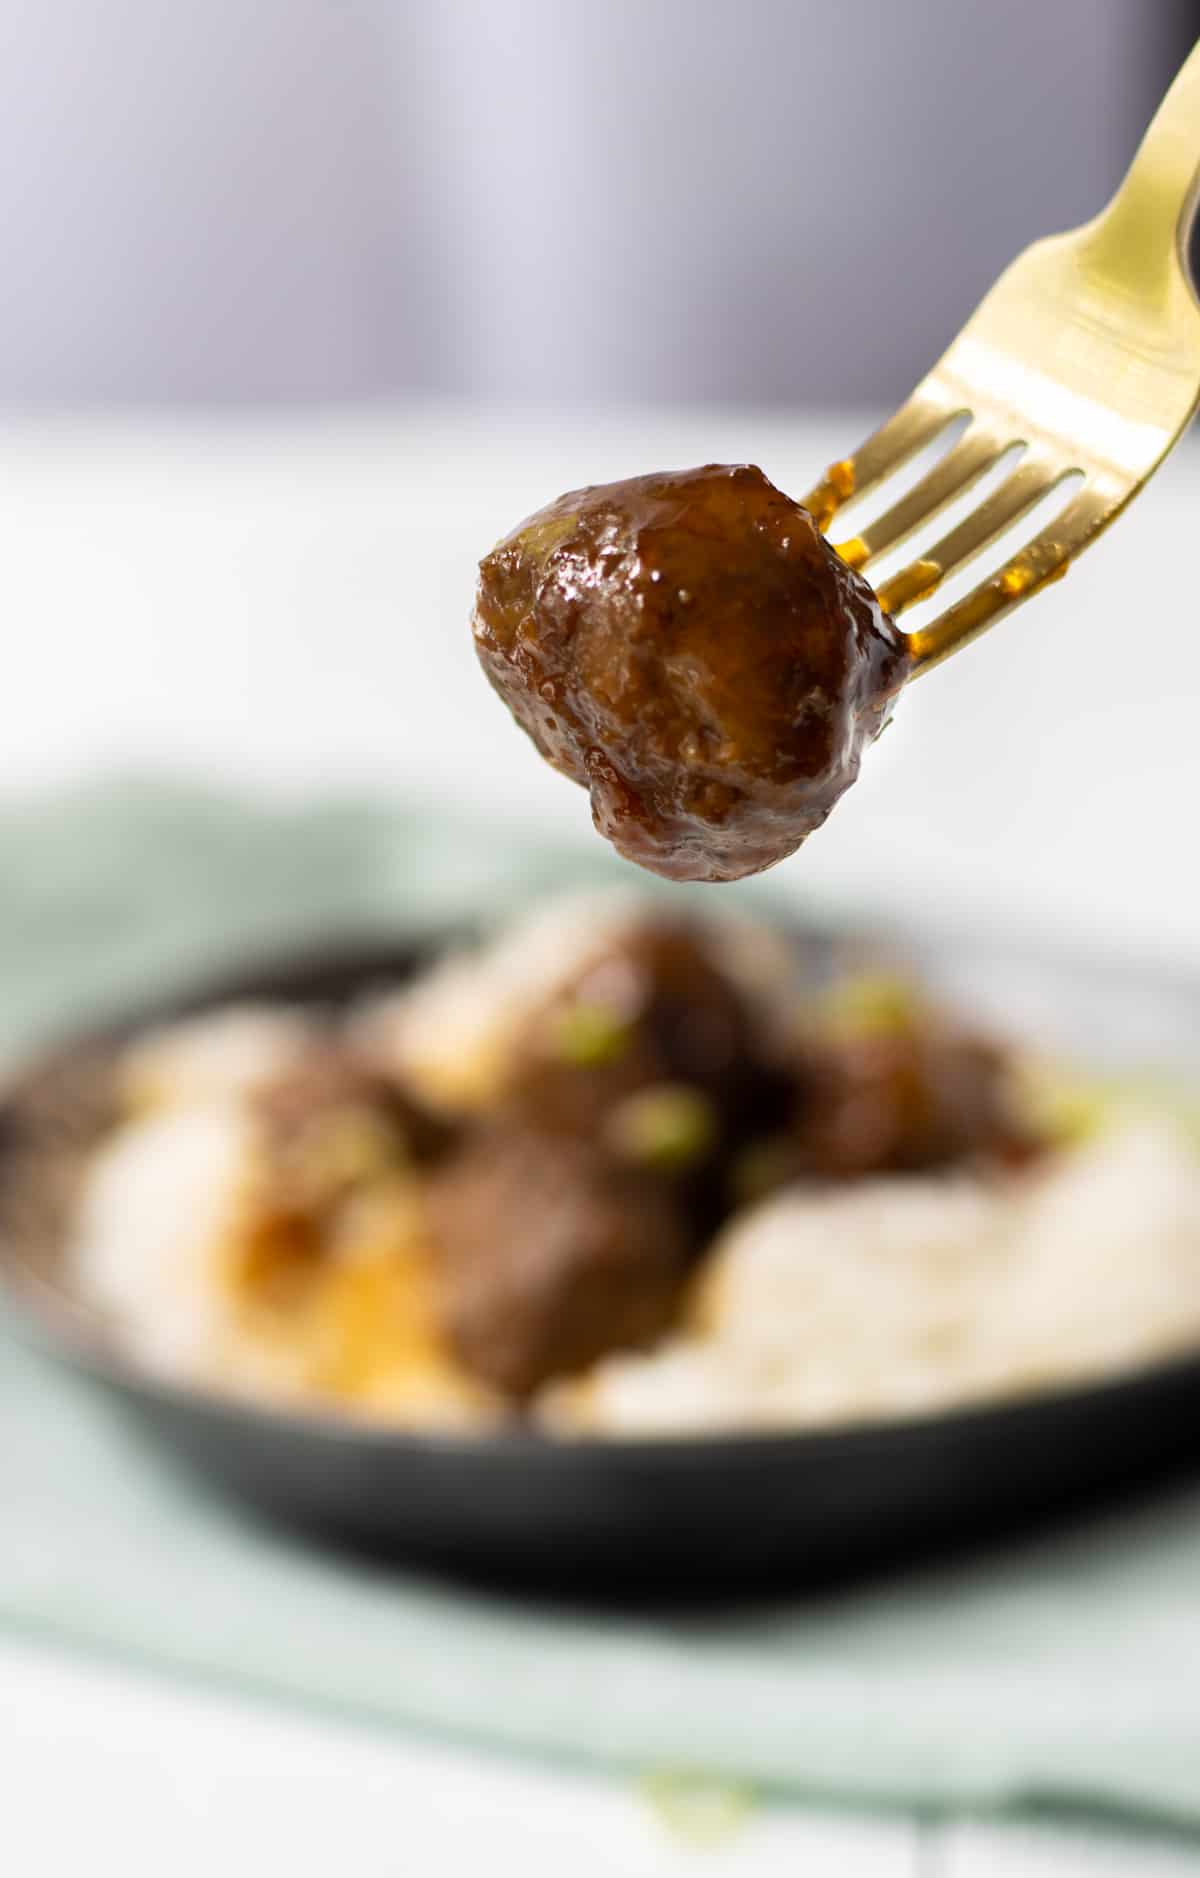 A meatball on a fork held in the air with a plate of rice and meatballs in the background.